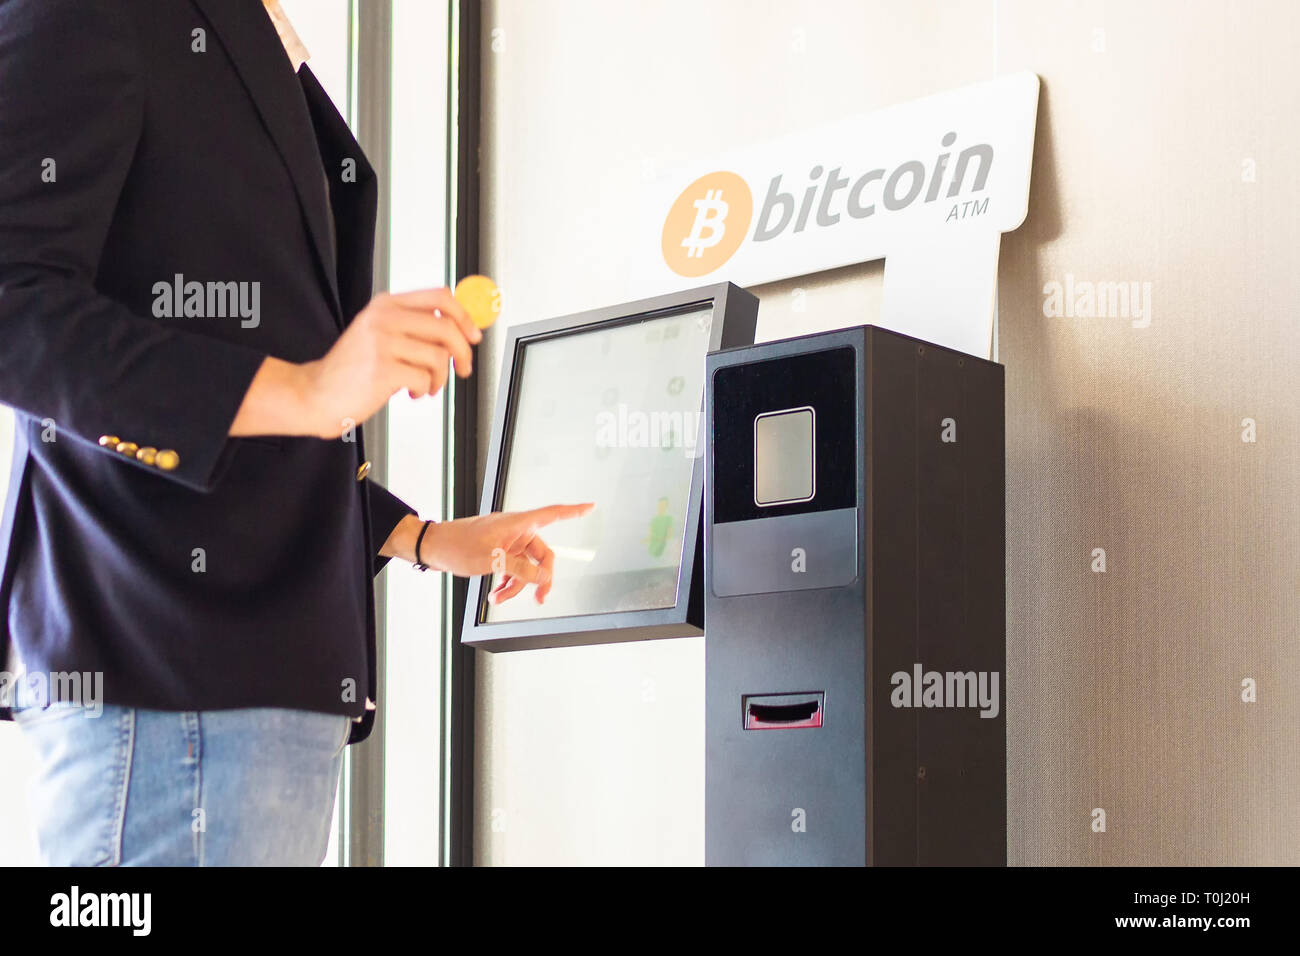 Bitcoin ATM machine being used by businessman for buying cryptocurrency and other altcoins Stock Photo